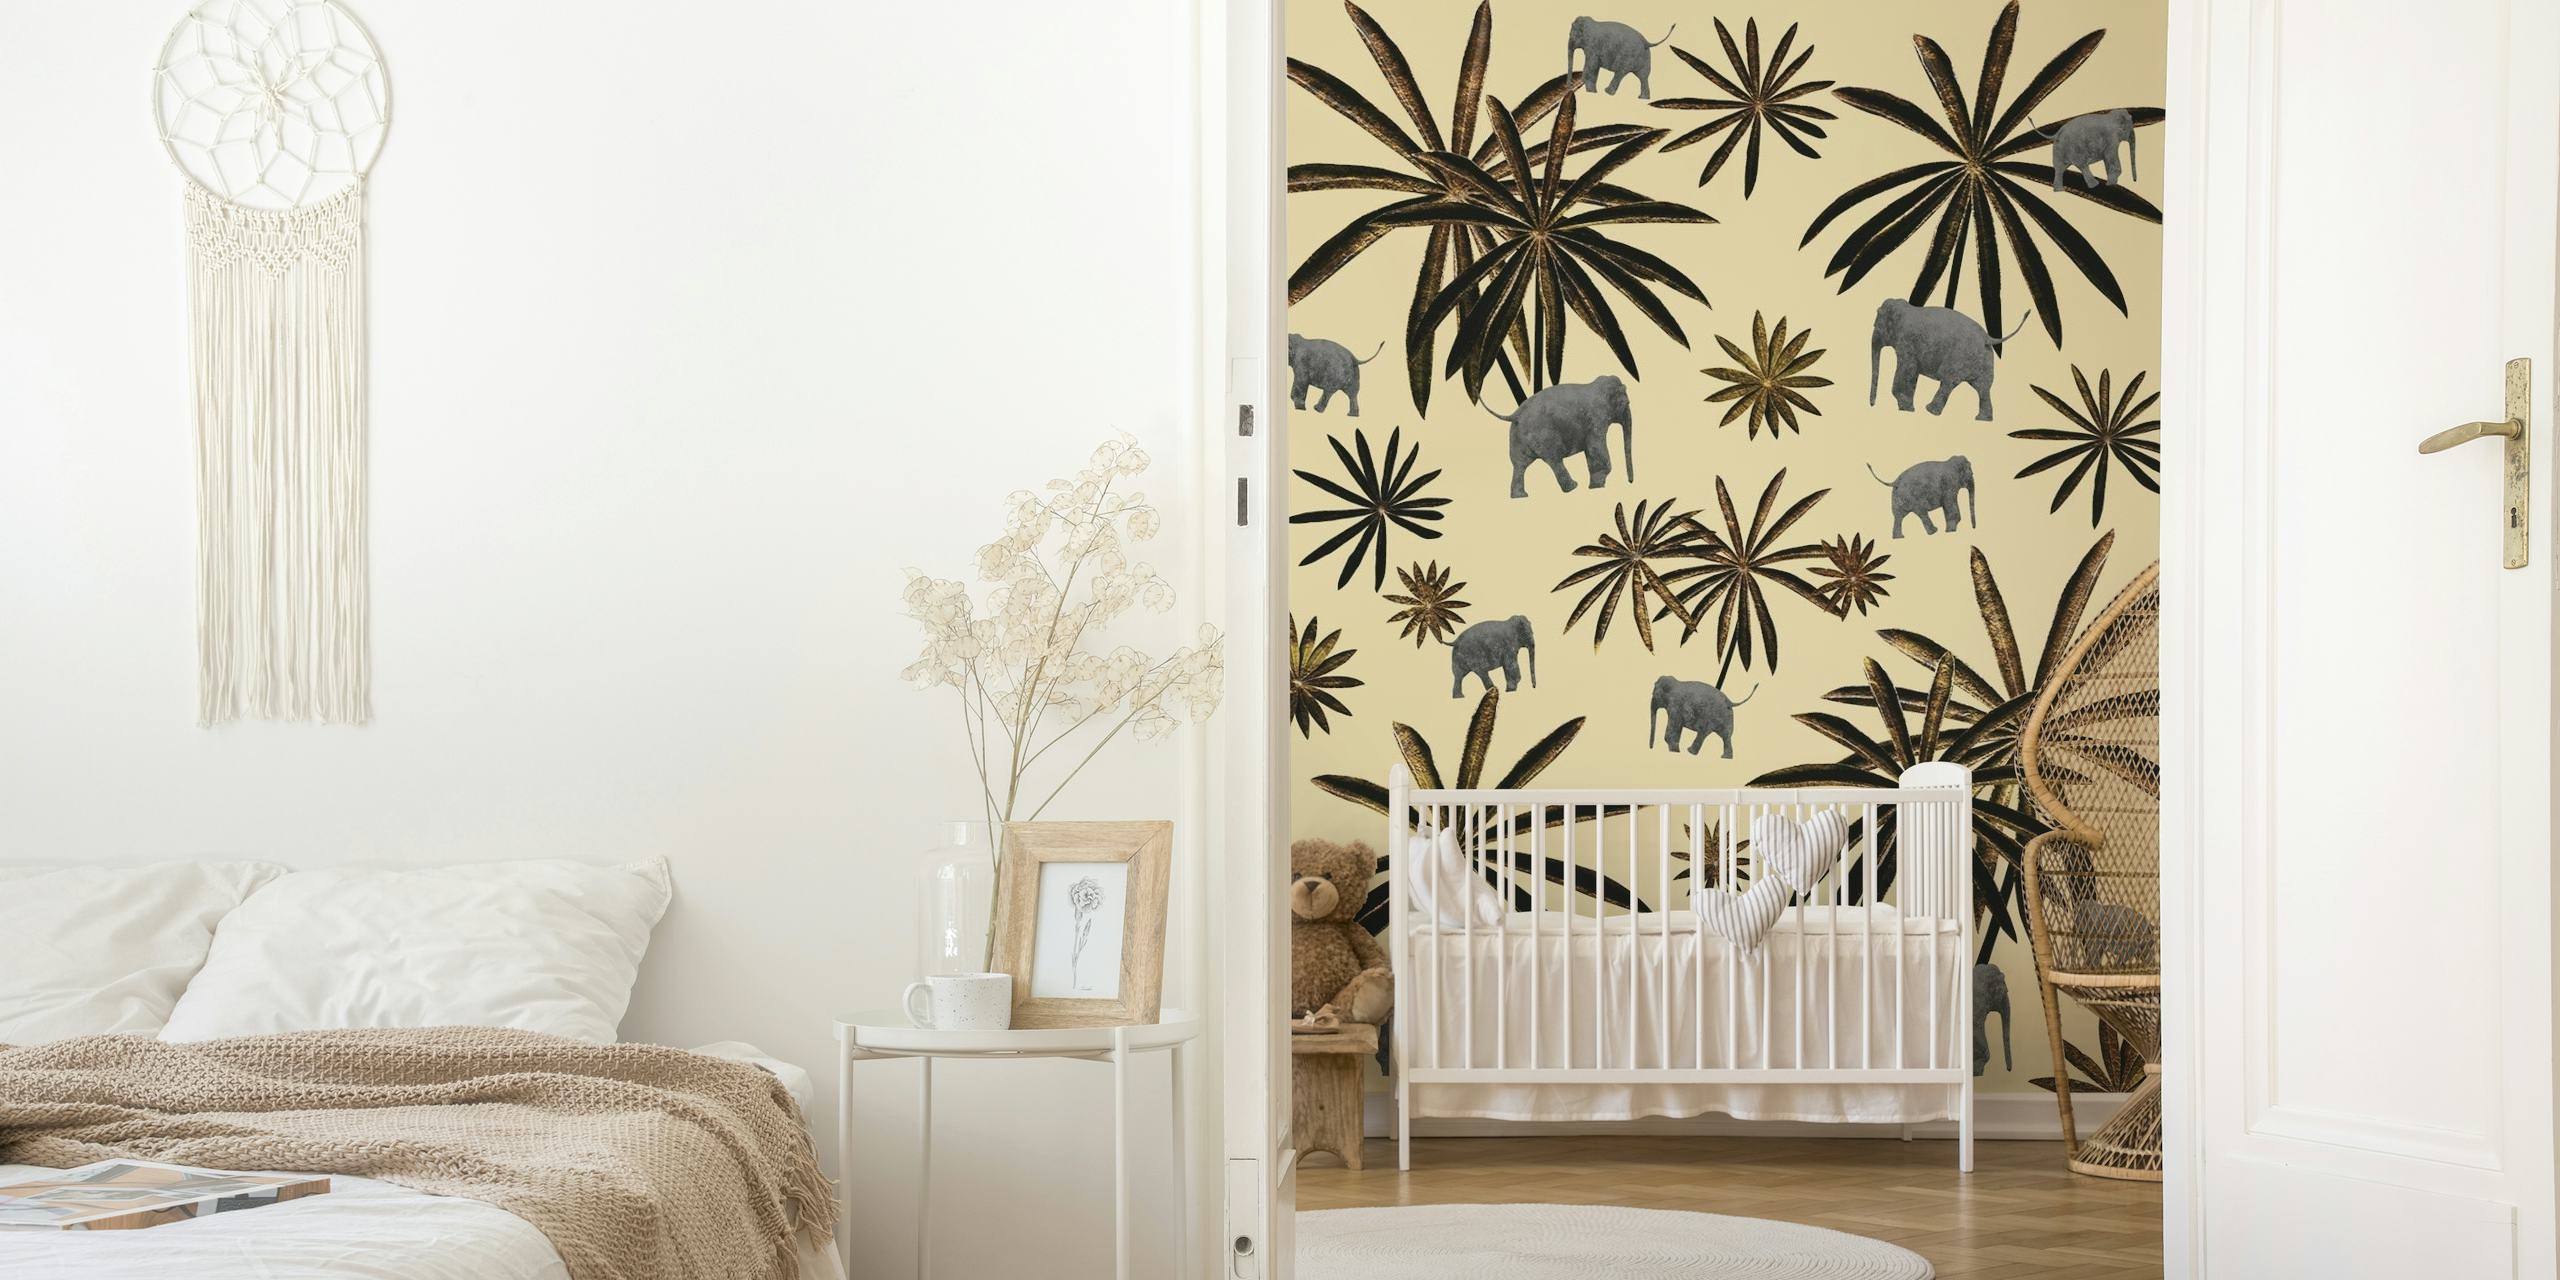 Illustrative wall mural featuring elephants and palm trees in earthy tones on a neutral background